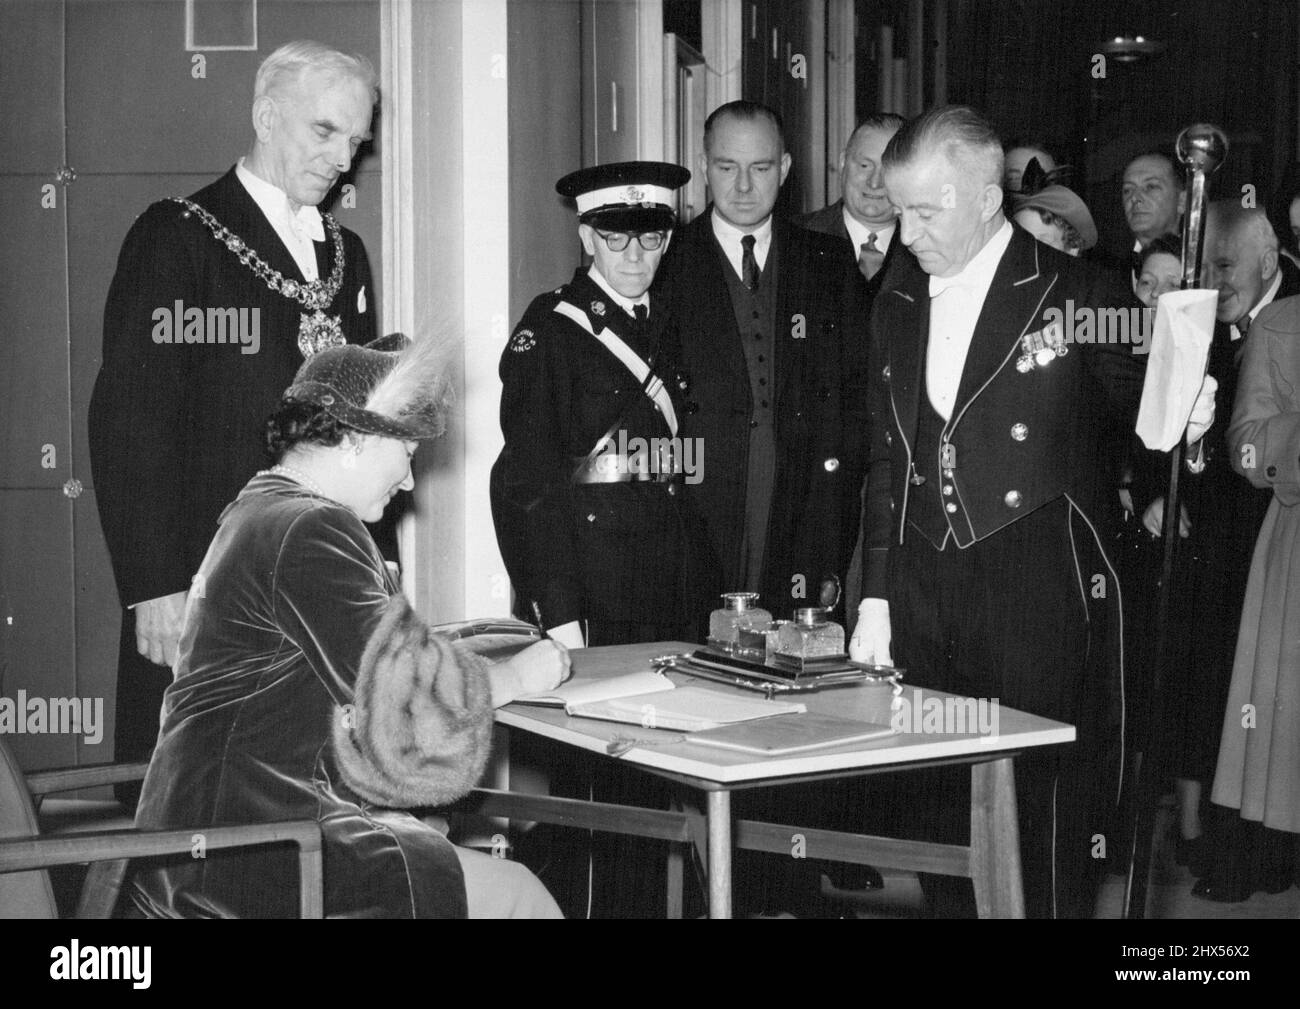 The Queen Opens Rebuilt Free Trade Hall In Manchester Her Majesty signs the book after unveiling the tablet commemorating the reconstruction and re-opening of the Manchester Free Trade Hall. Her Majesty the Queen performed the opening ceremony of the rebuilt Free Trade Hall in Manchester on Friday, November 16th, unveiling a tablet at the entrance to mark the event. November 19, 1951. (Photo by Fox Photos). Stock Photo